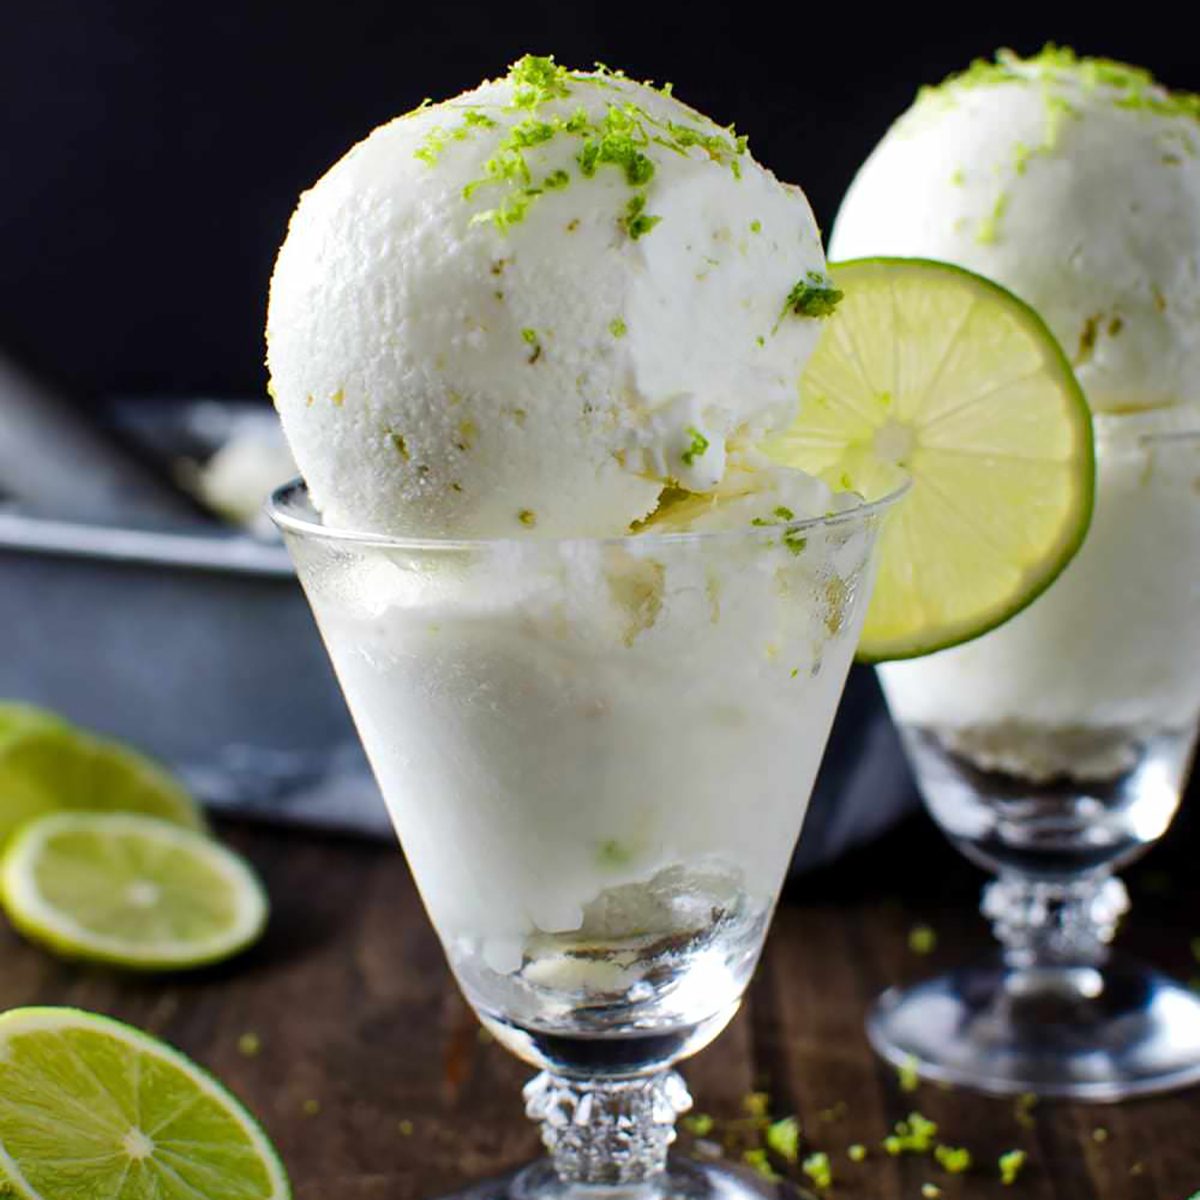 16 Margarita Dessert Recipes Inspired by Your Favorite Drink